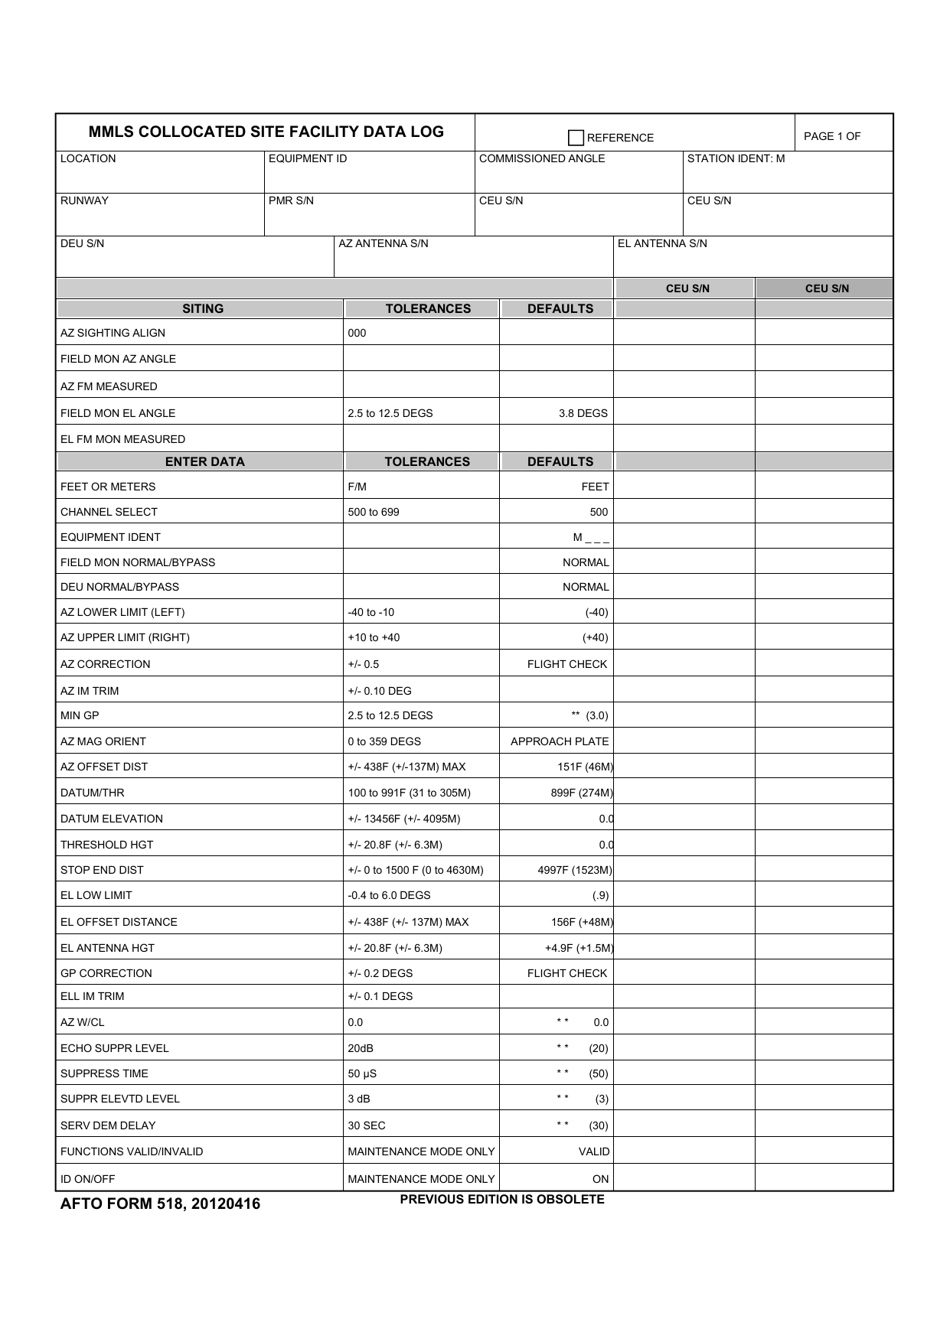 AFTO Form 518 Mmls Collocated Site Facility Data Log, Page 1